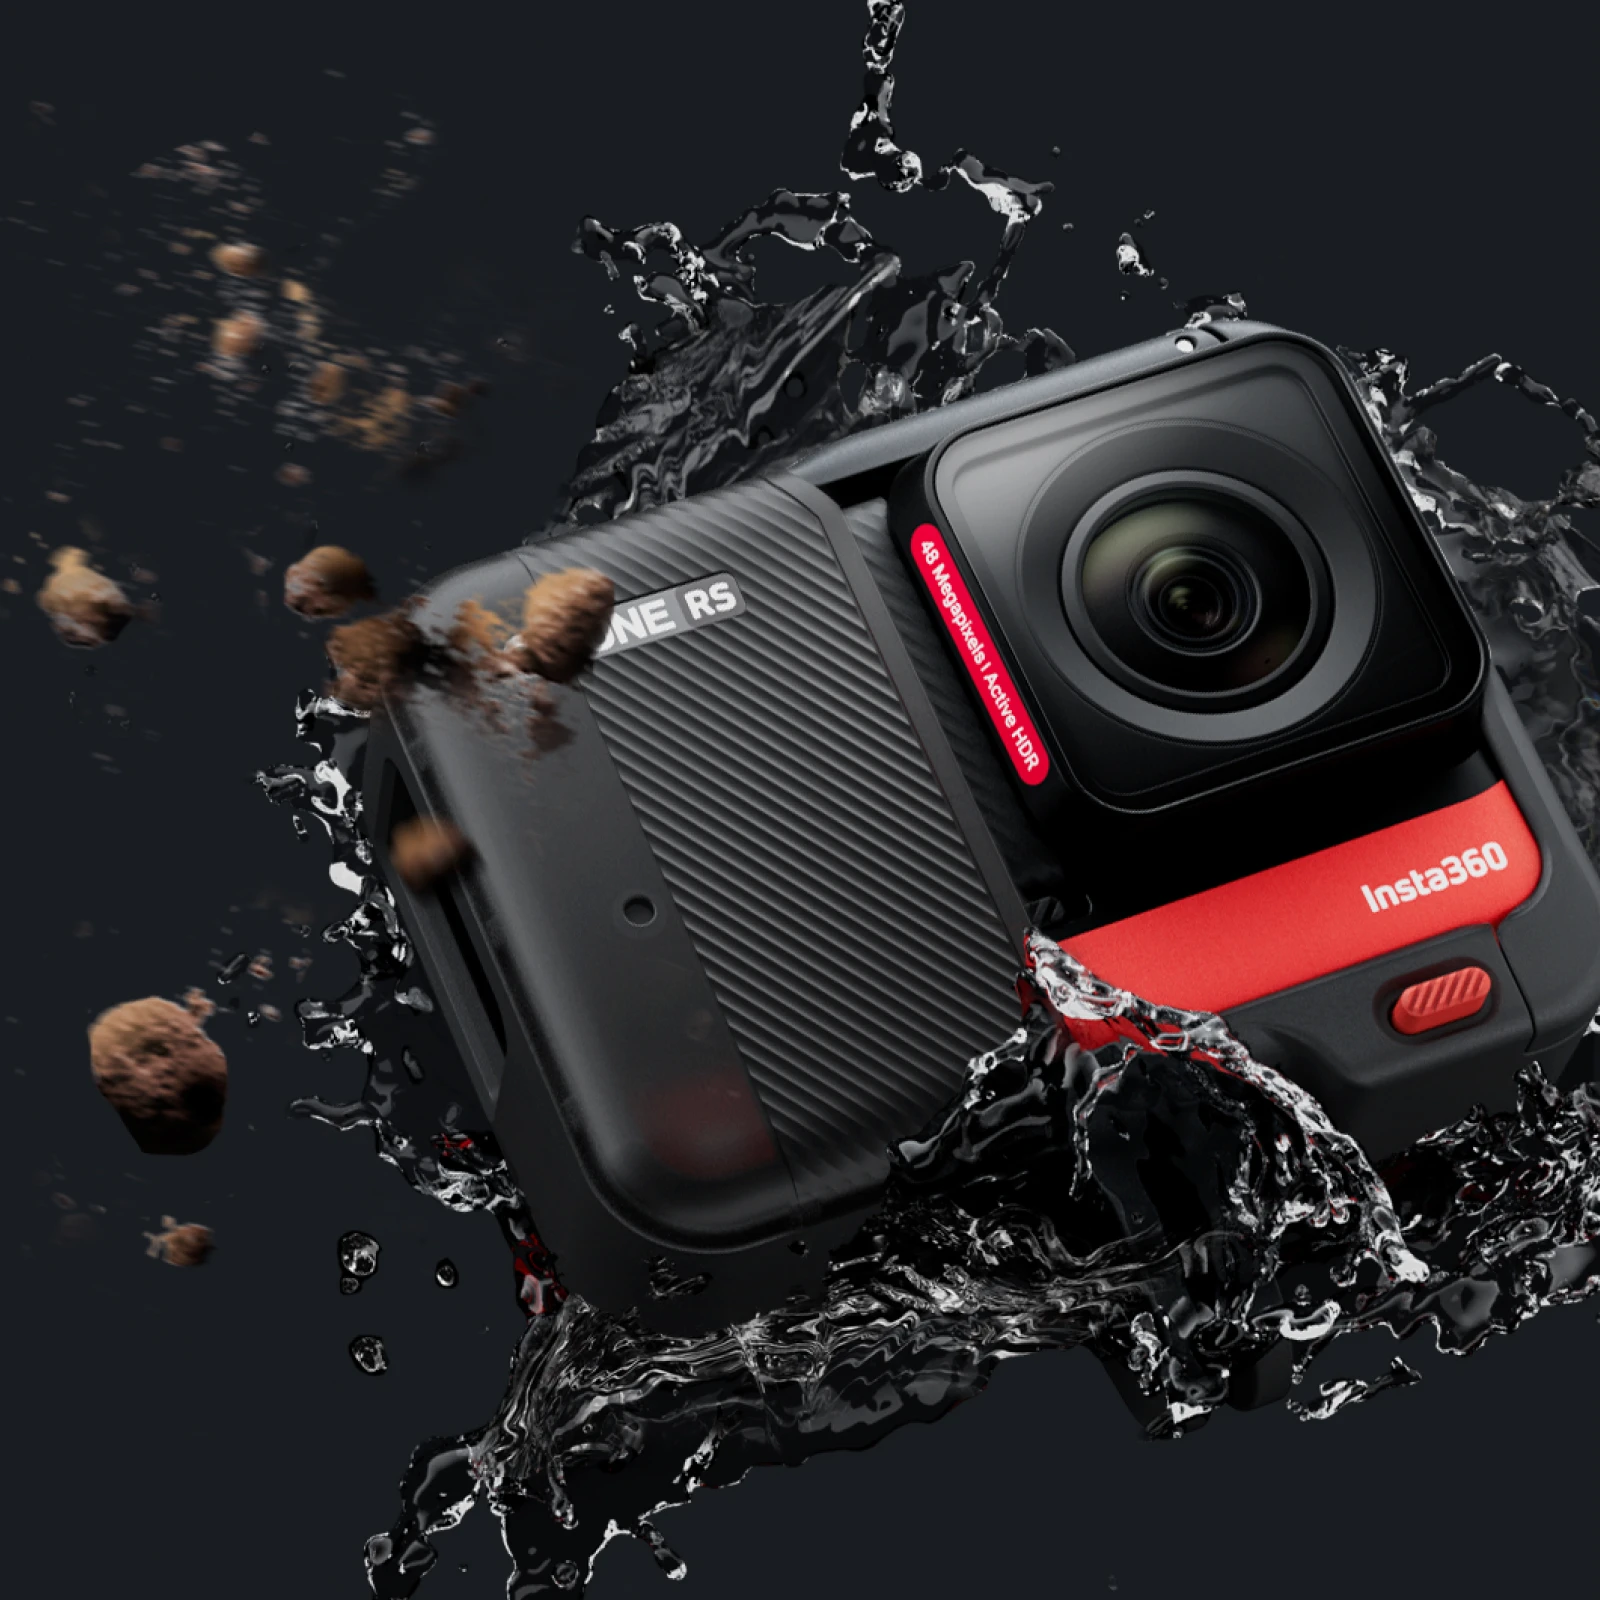 https://ae01.alicdn.com/kf/Ab9154ef918094ab188f1692f031bc611L/Insta360-ONE-RS-Sports-Action-Camera-5-7K-360-4K-Wide-Angle-Waterproof-Video-camera-48MP.jpg